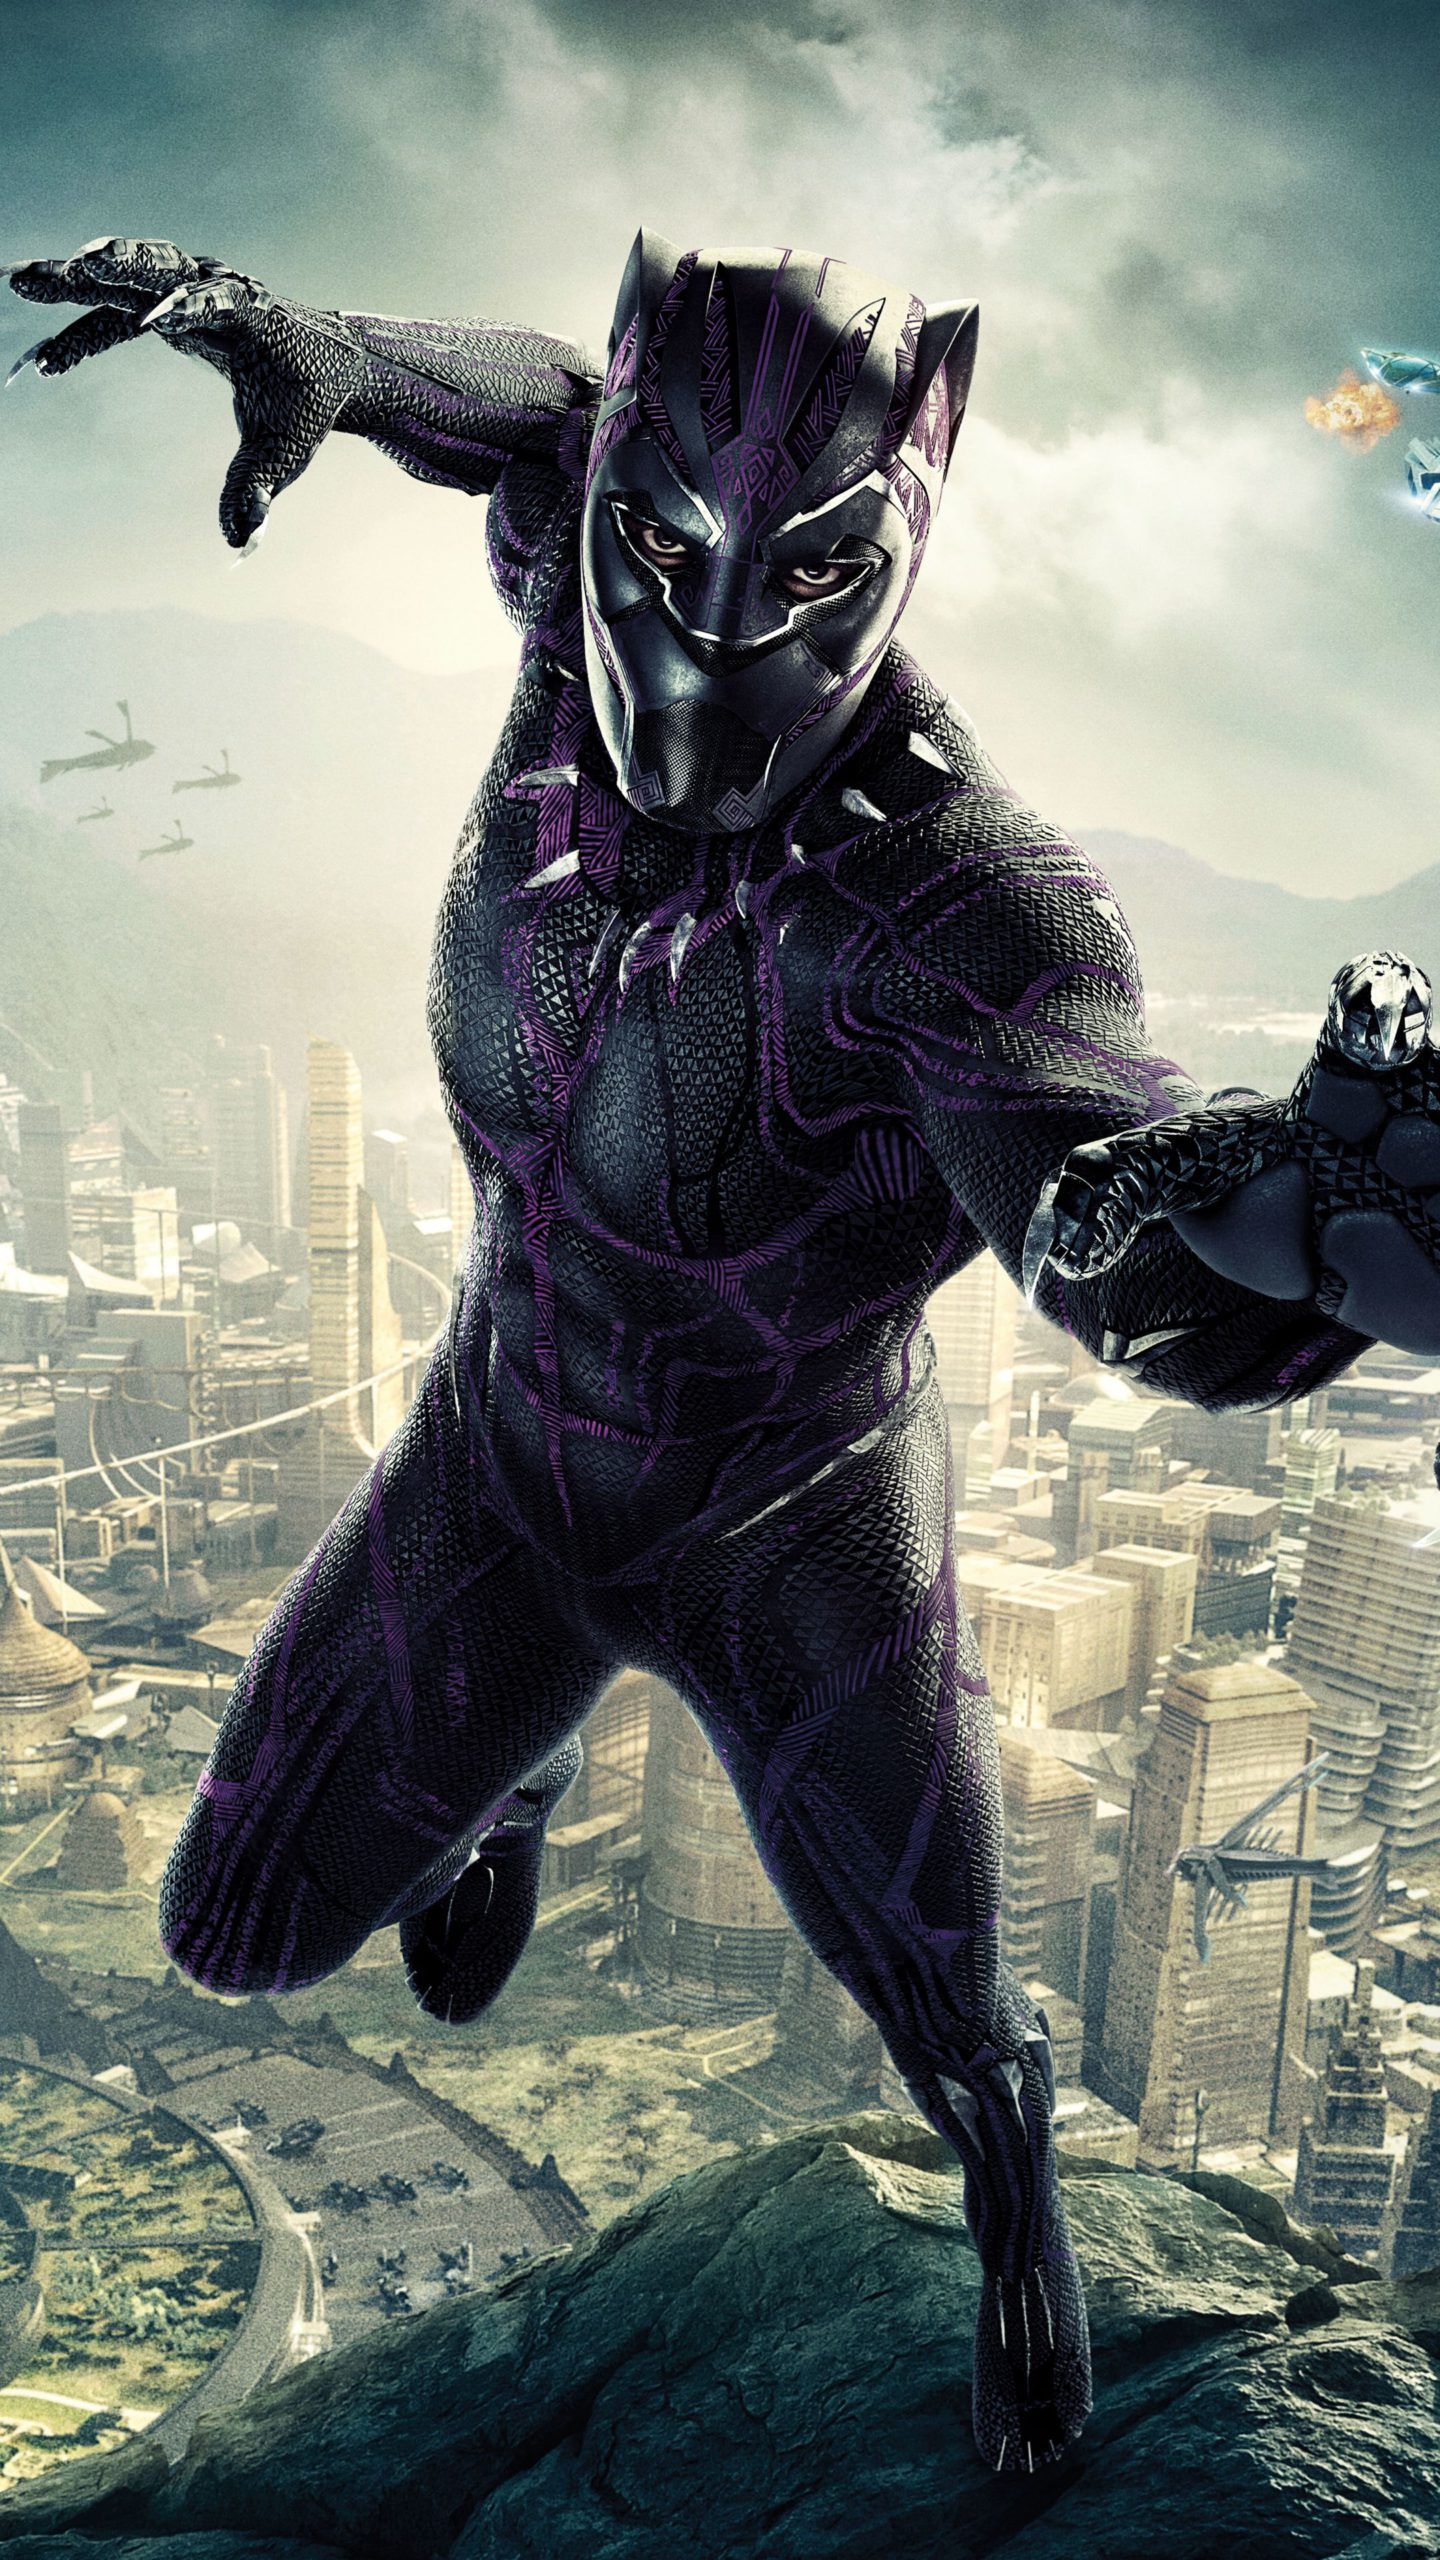 BLACK PANTHER 2: Wakanda Forever! The much awaited sequel to MCU's